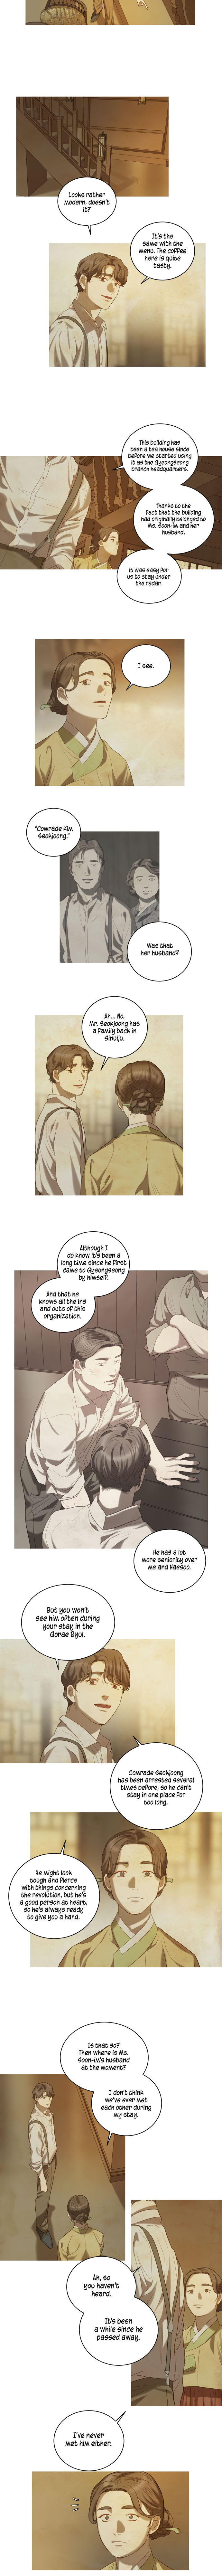 Gorae Byul - The Gyeongseong Mermaid - Chapter 14 Page 7